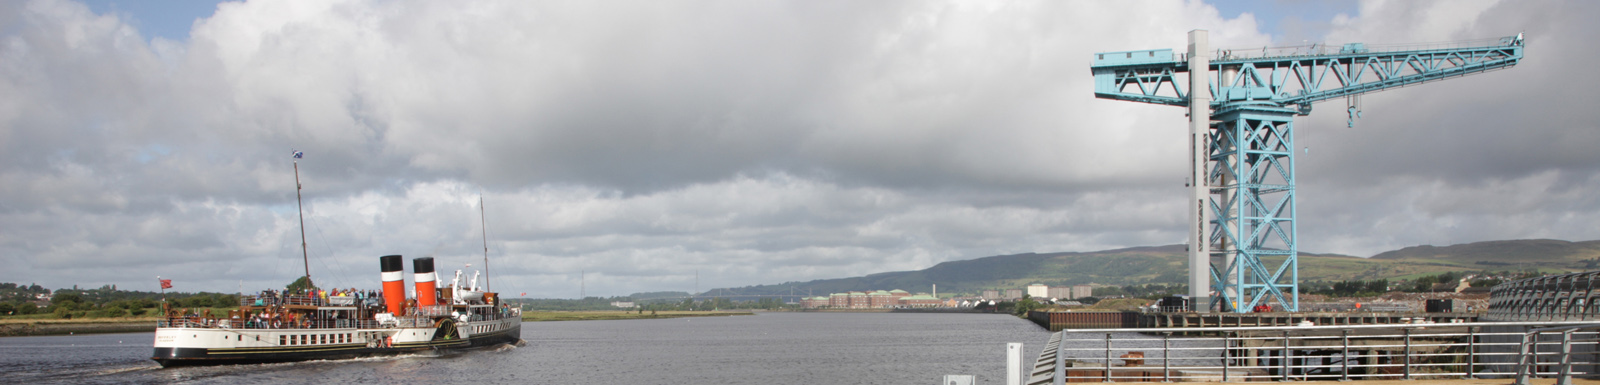 The Waverley paddle steamer passes the Clydebank Titan